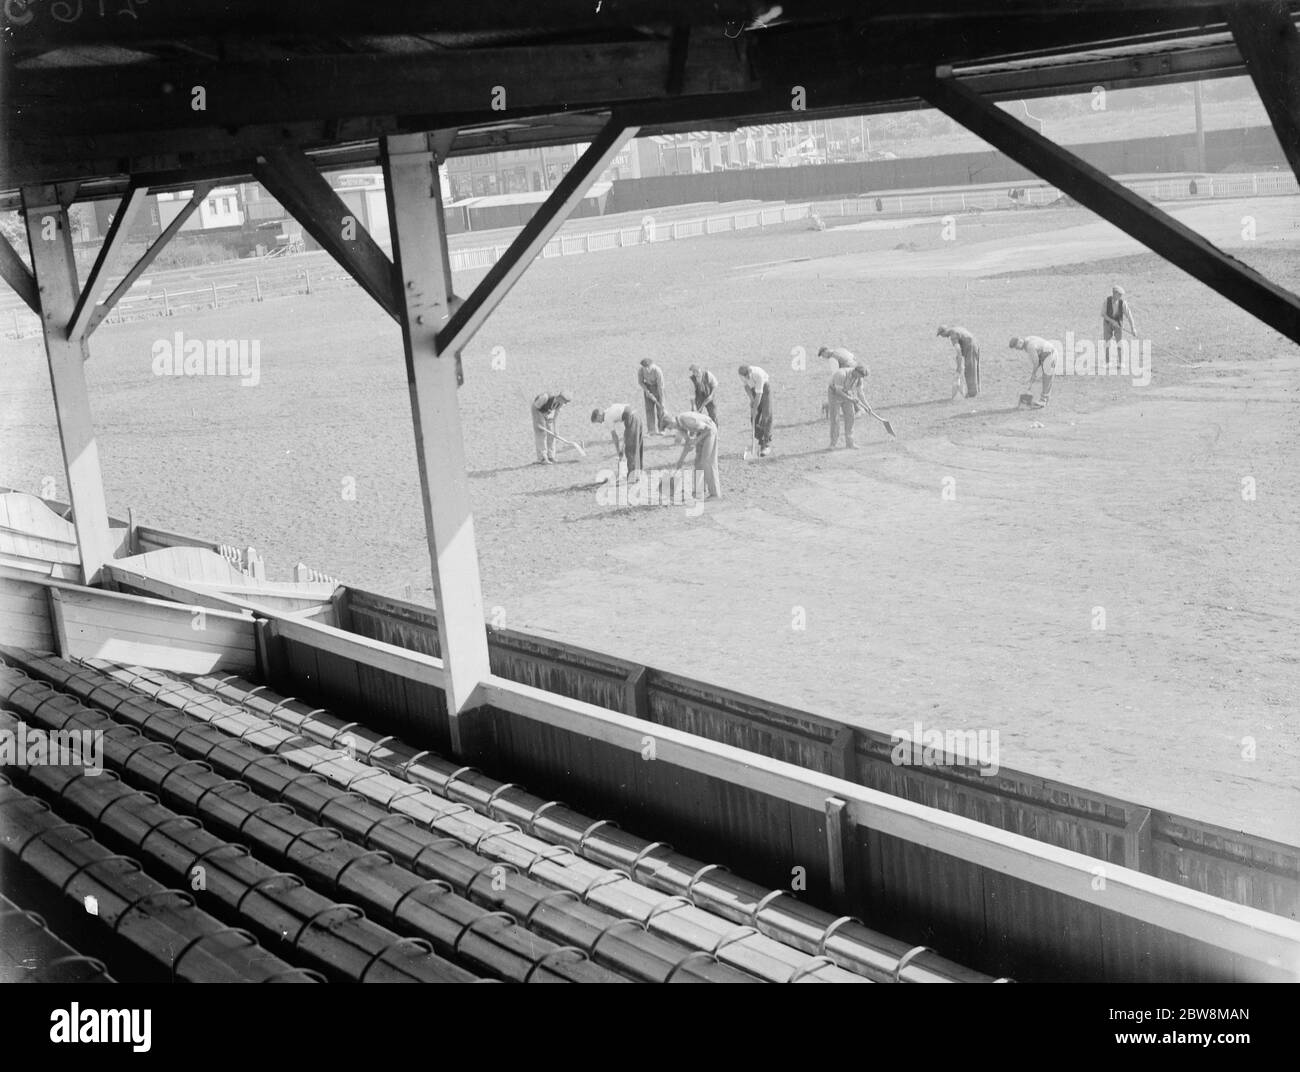 Northfleet United - Relaying the pitch at Northfleet United's Stonebridge Road ground. - 1935 Scene from the spectator stands , workers on the pitch at the Northfleet football ground . 1935 Stock Photo